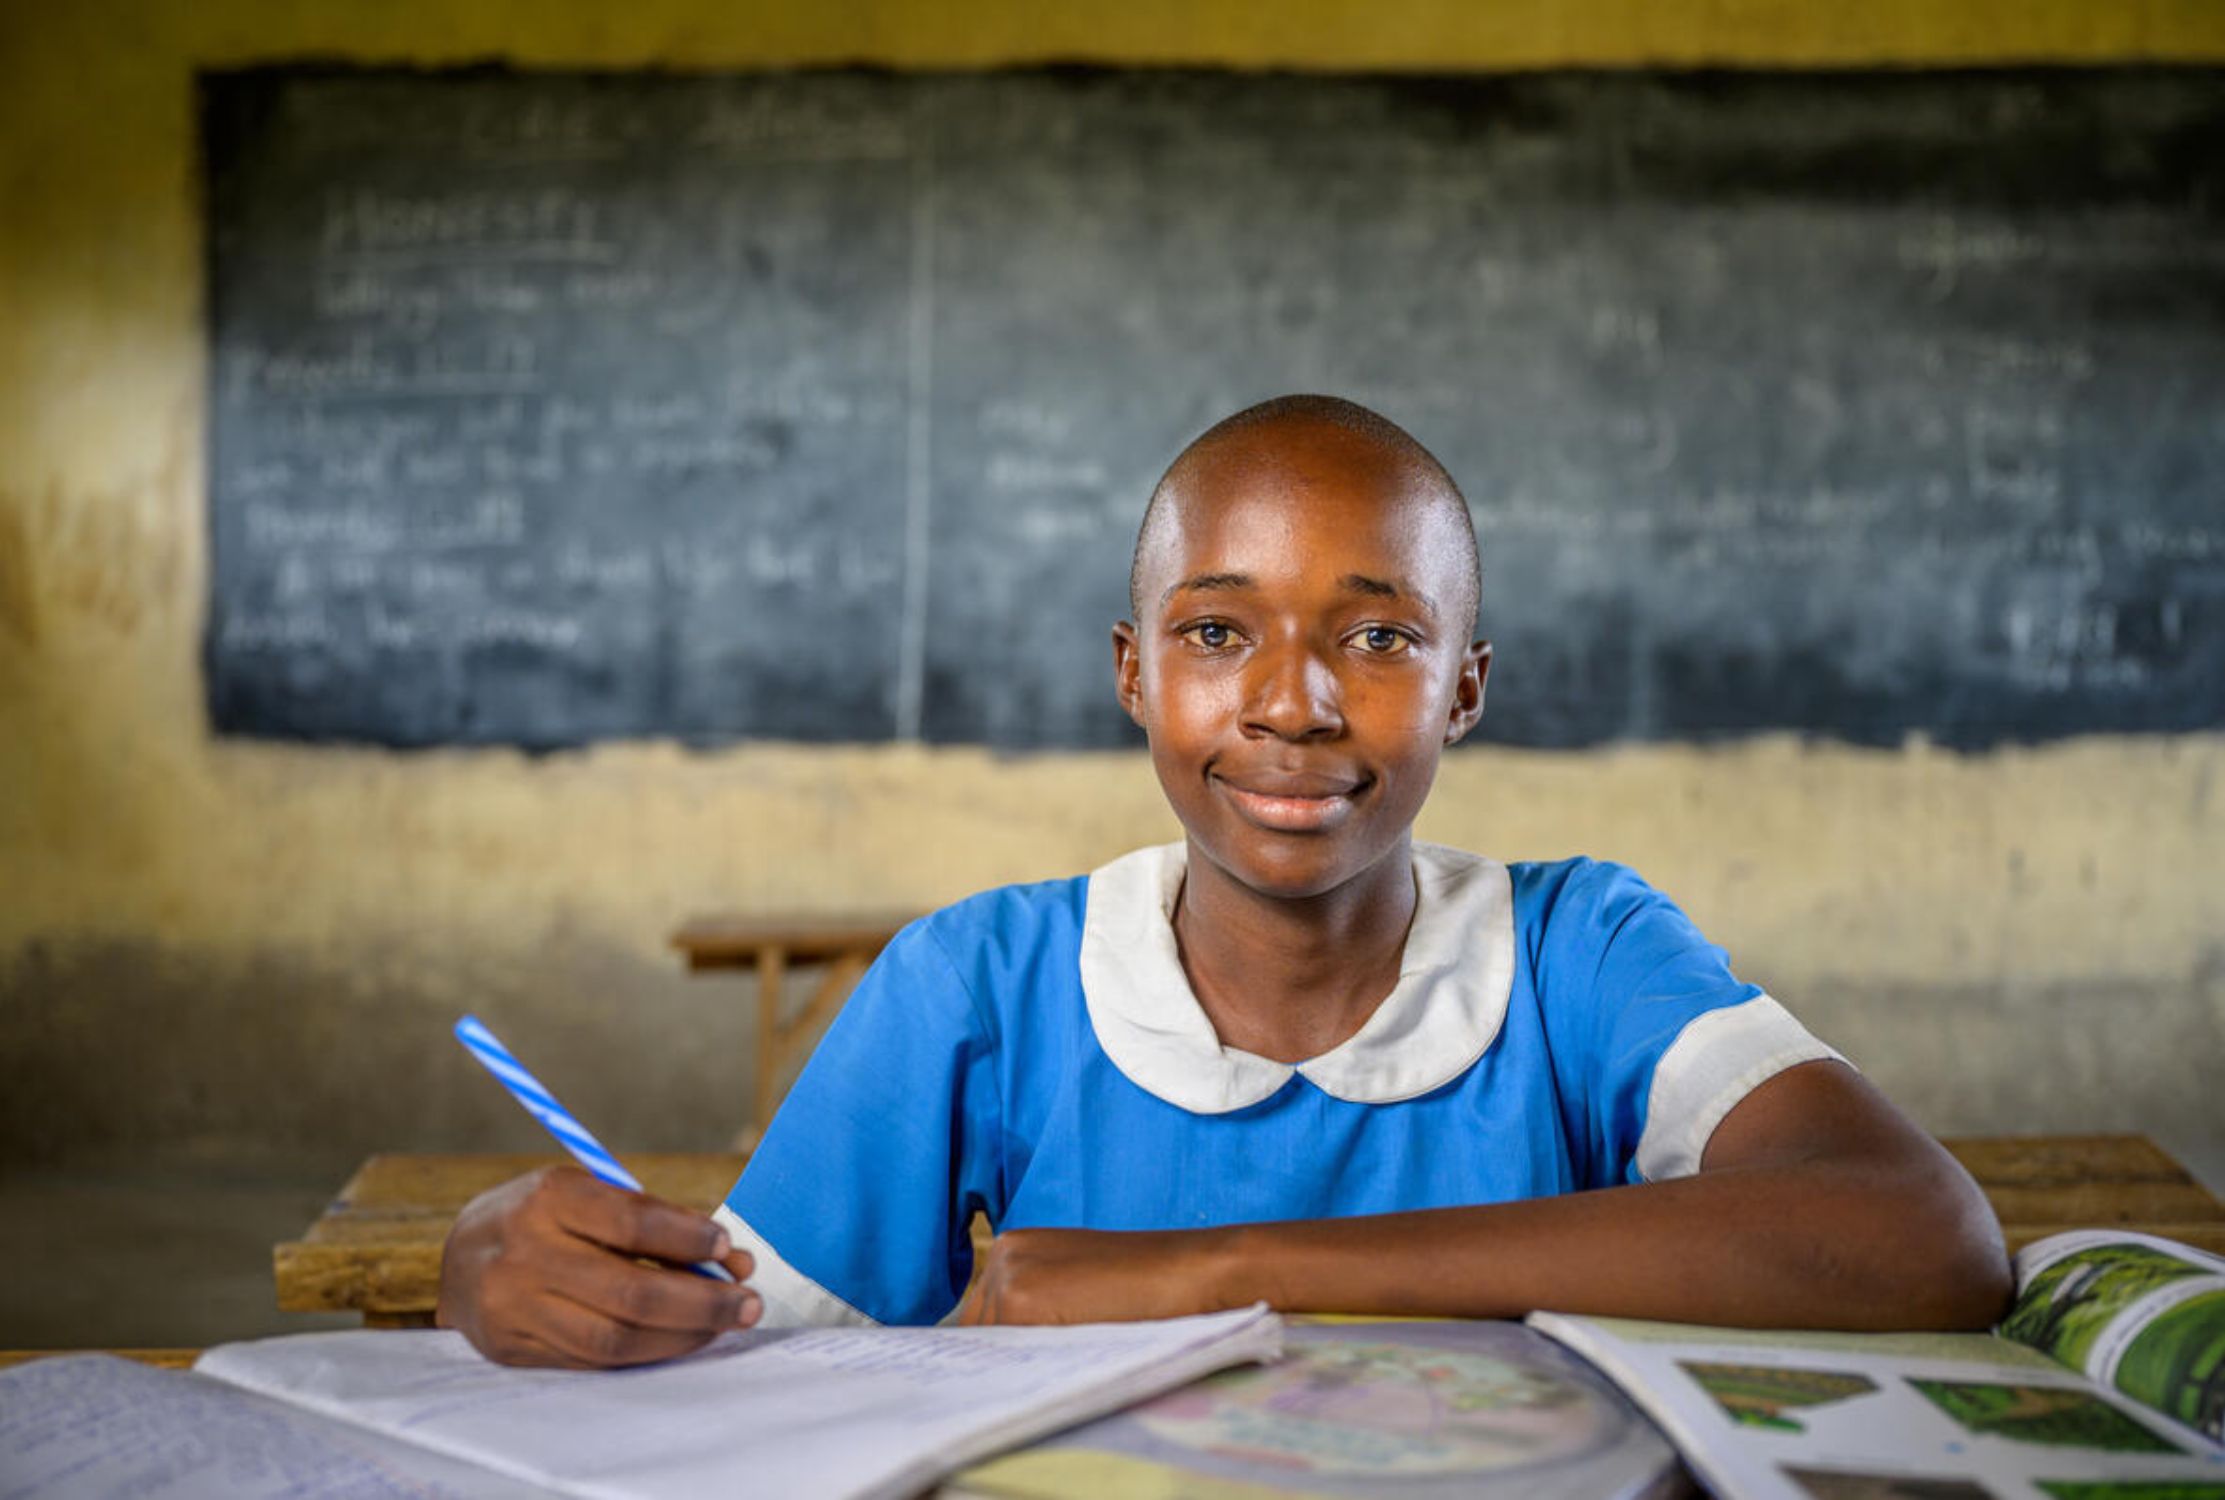 A girl from Kenya in a school uniform writing in a notebook and smiling at the camera